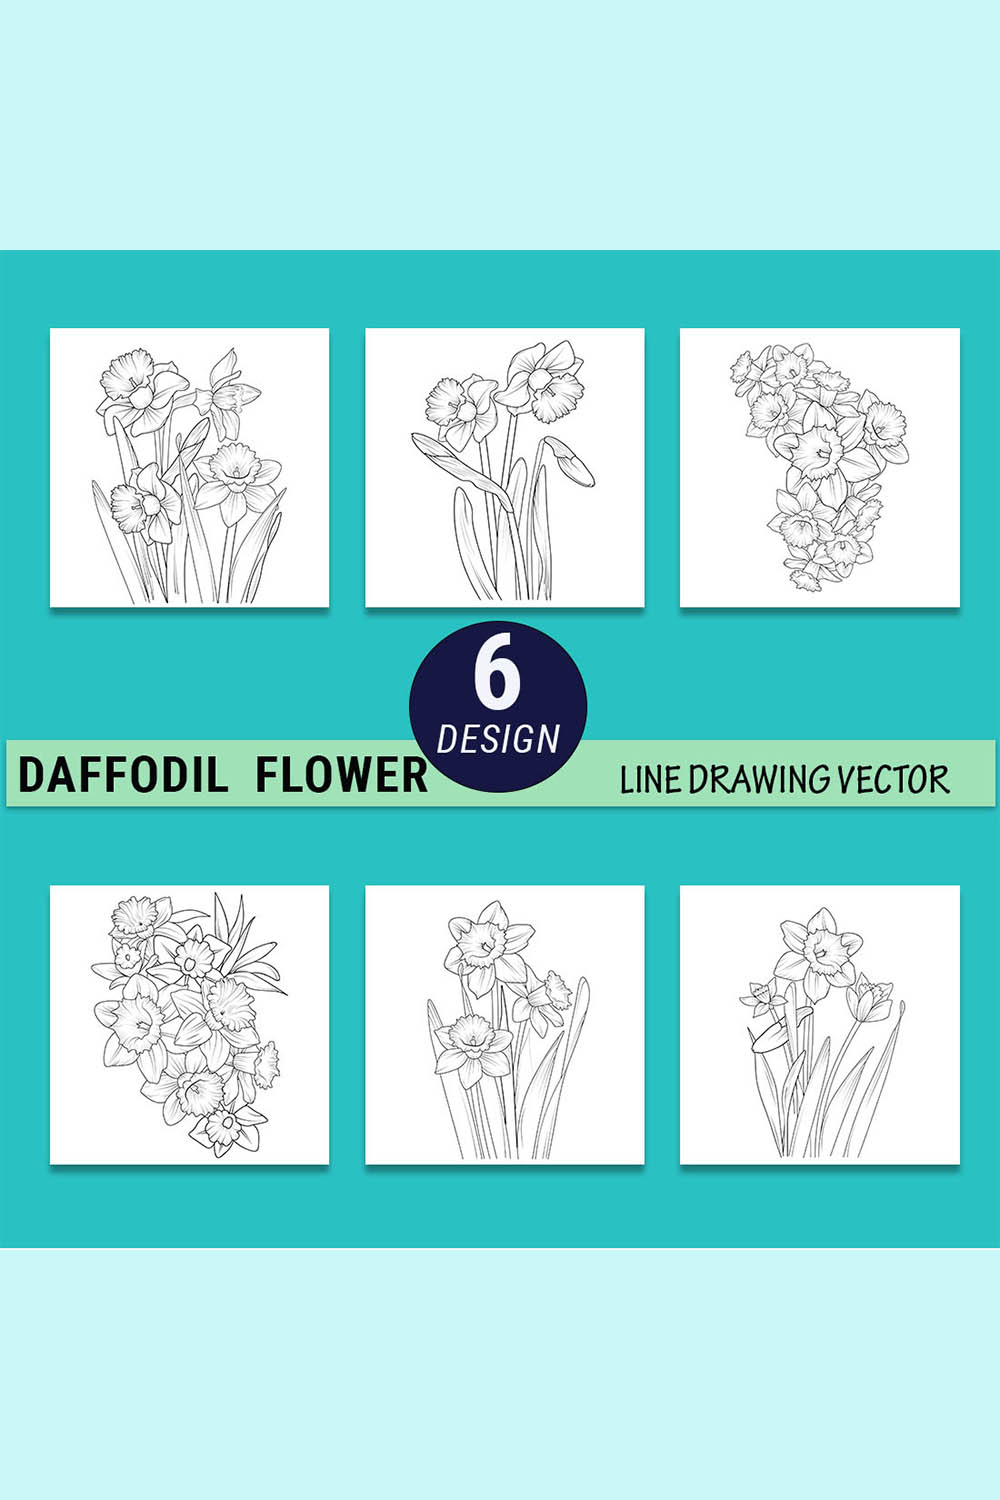 pencil narcussus flower drawing, daffodil vector art, daffodil pencil sketch, narcussus line art, daffodil tattoo drawing pinterest preview image.